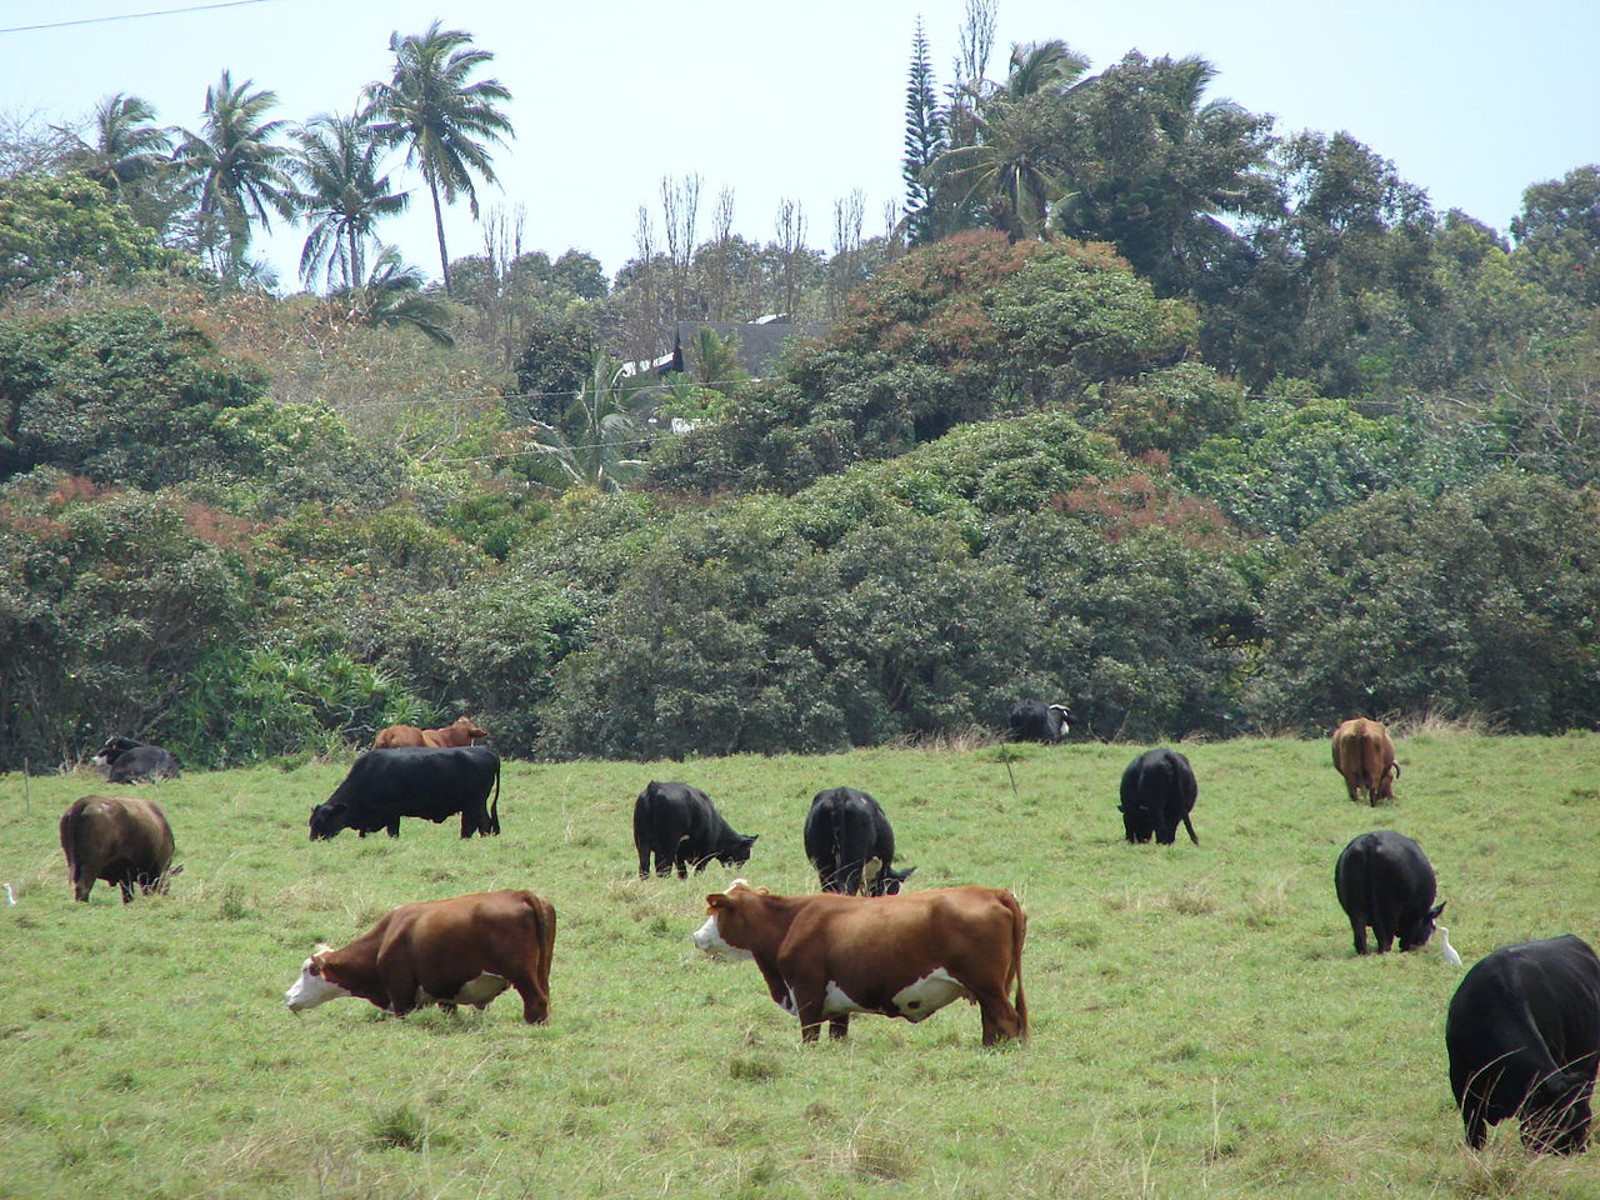 Cows in forest on field